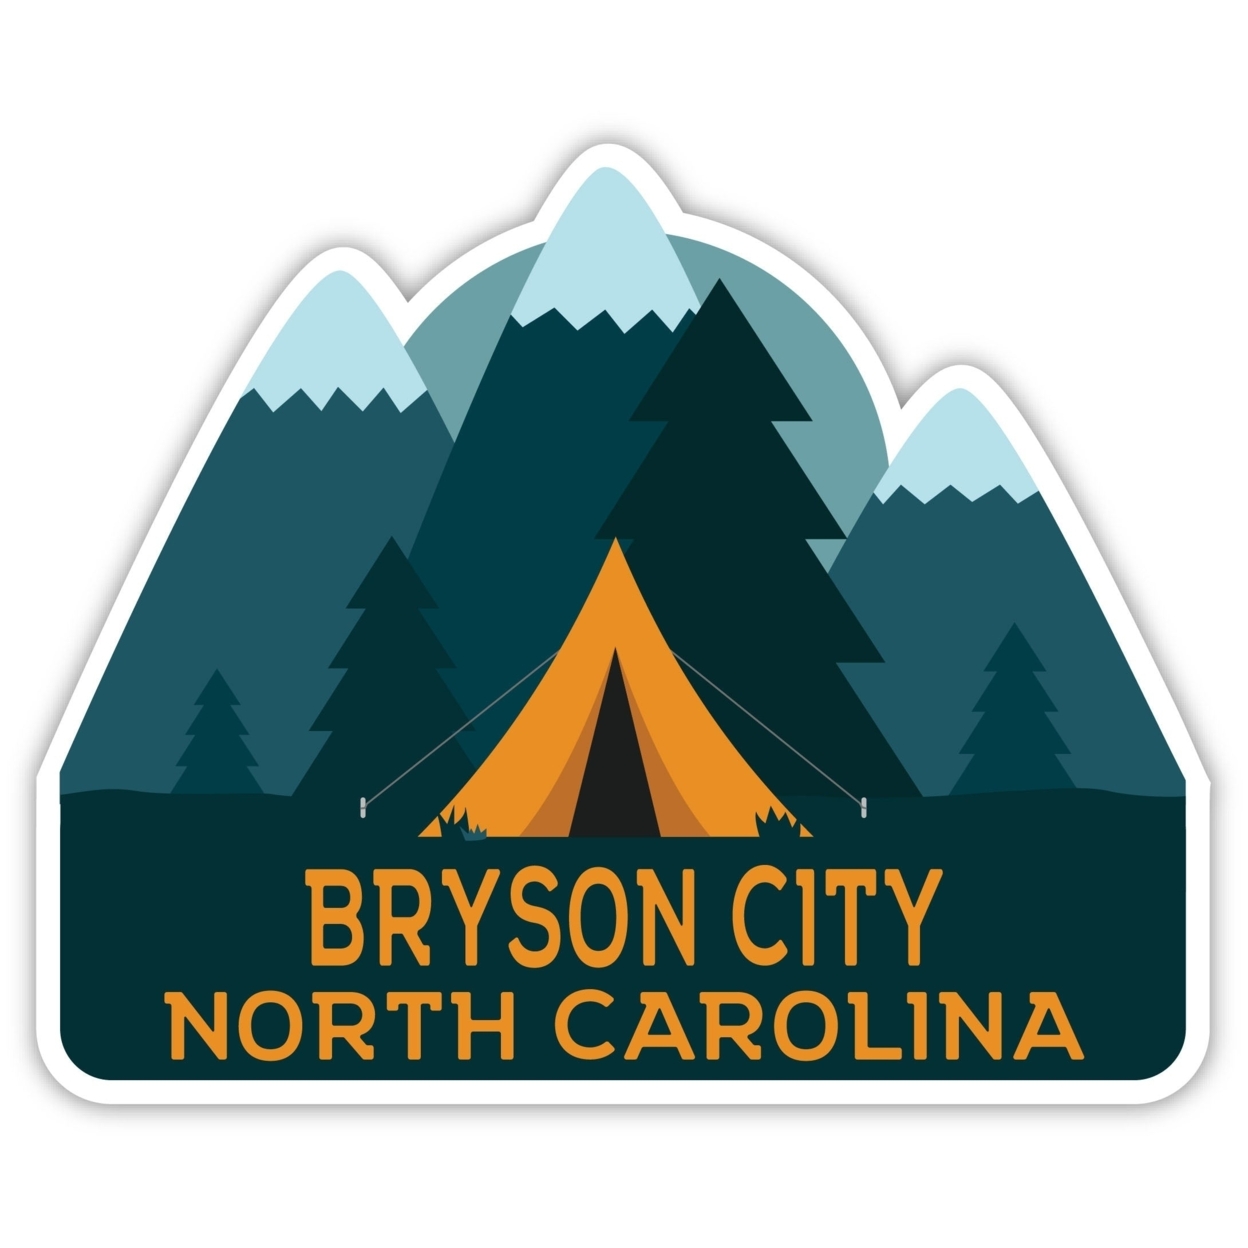 Bryson City North Carolina Souvenir Decorative Stickers (Choose Theme And Size) - 4-Pack, 6-Inch, Adventures Awaits